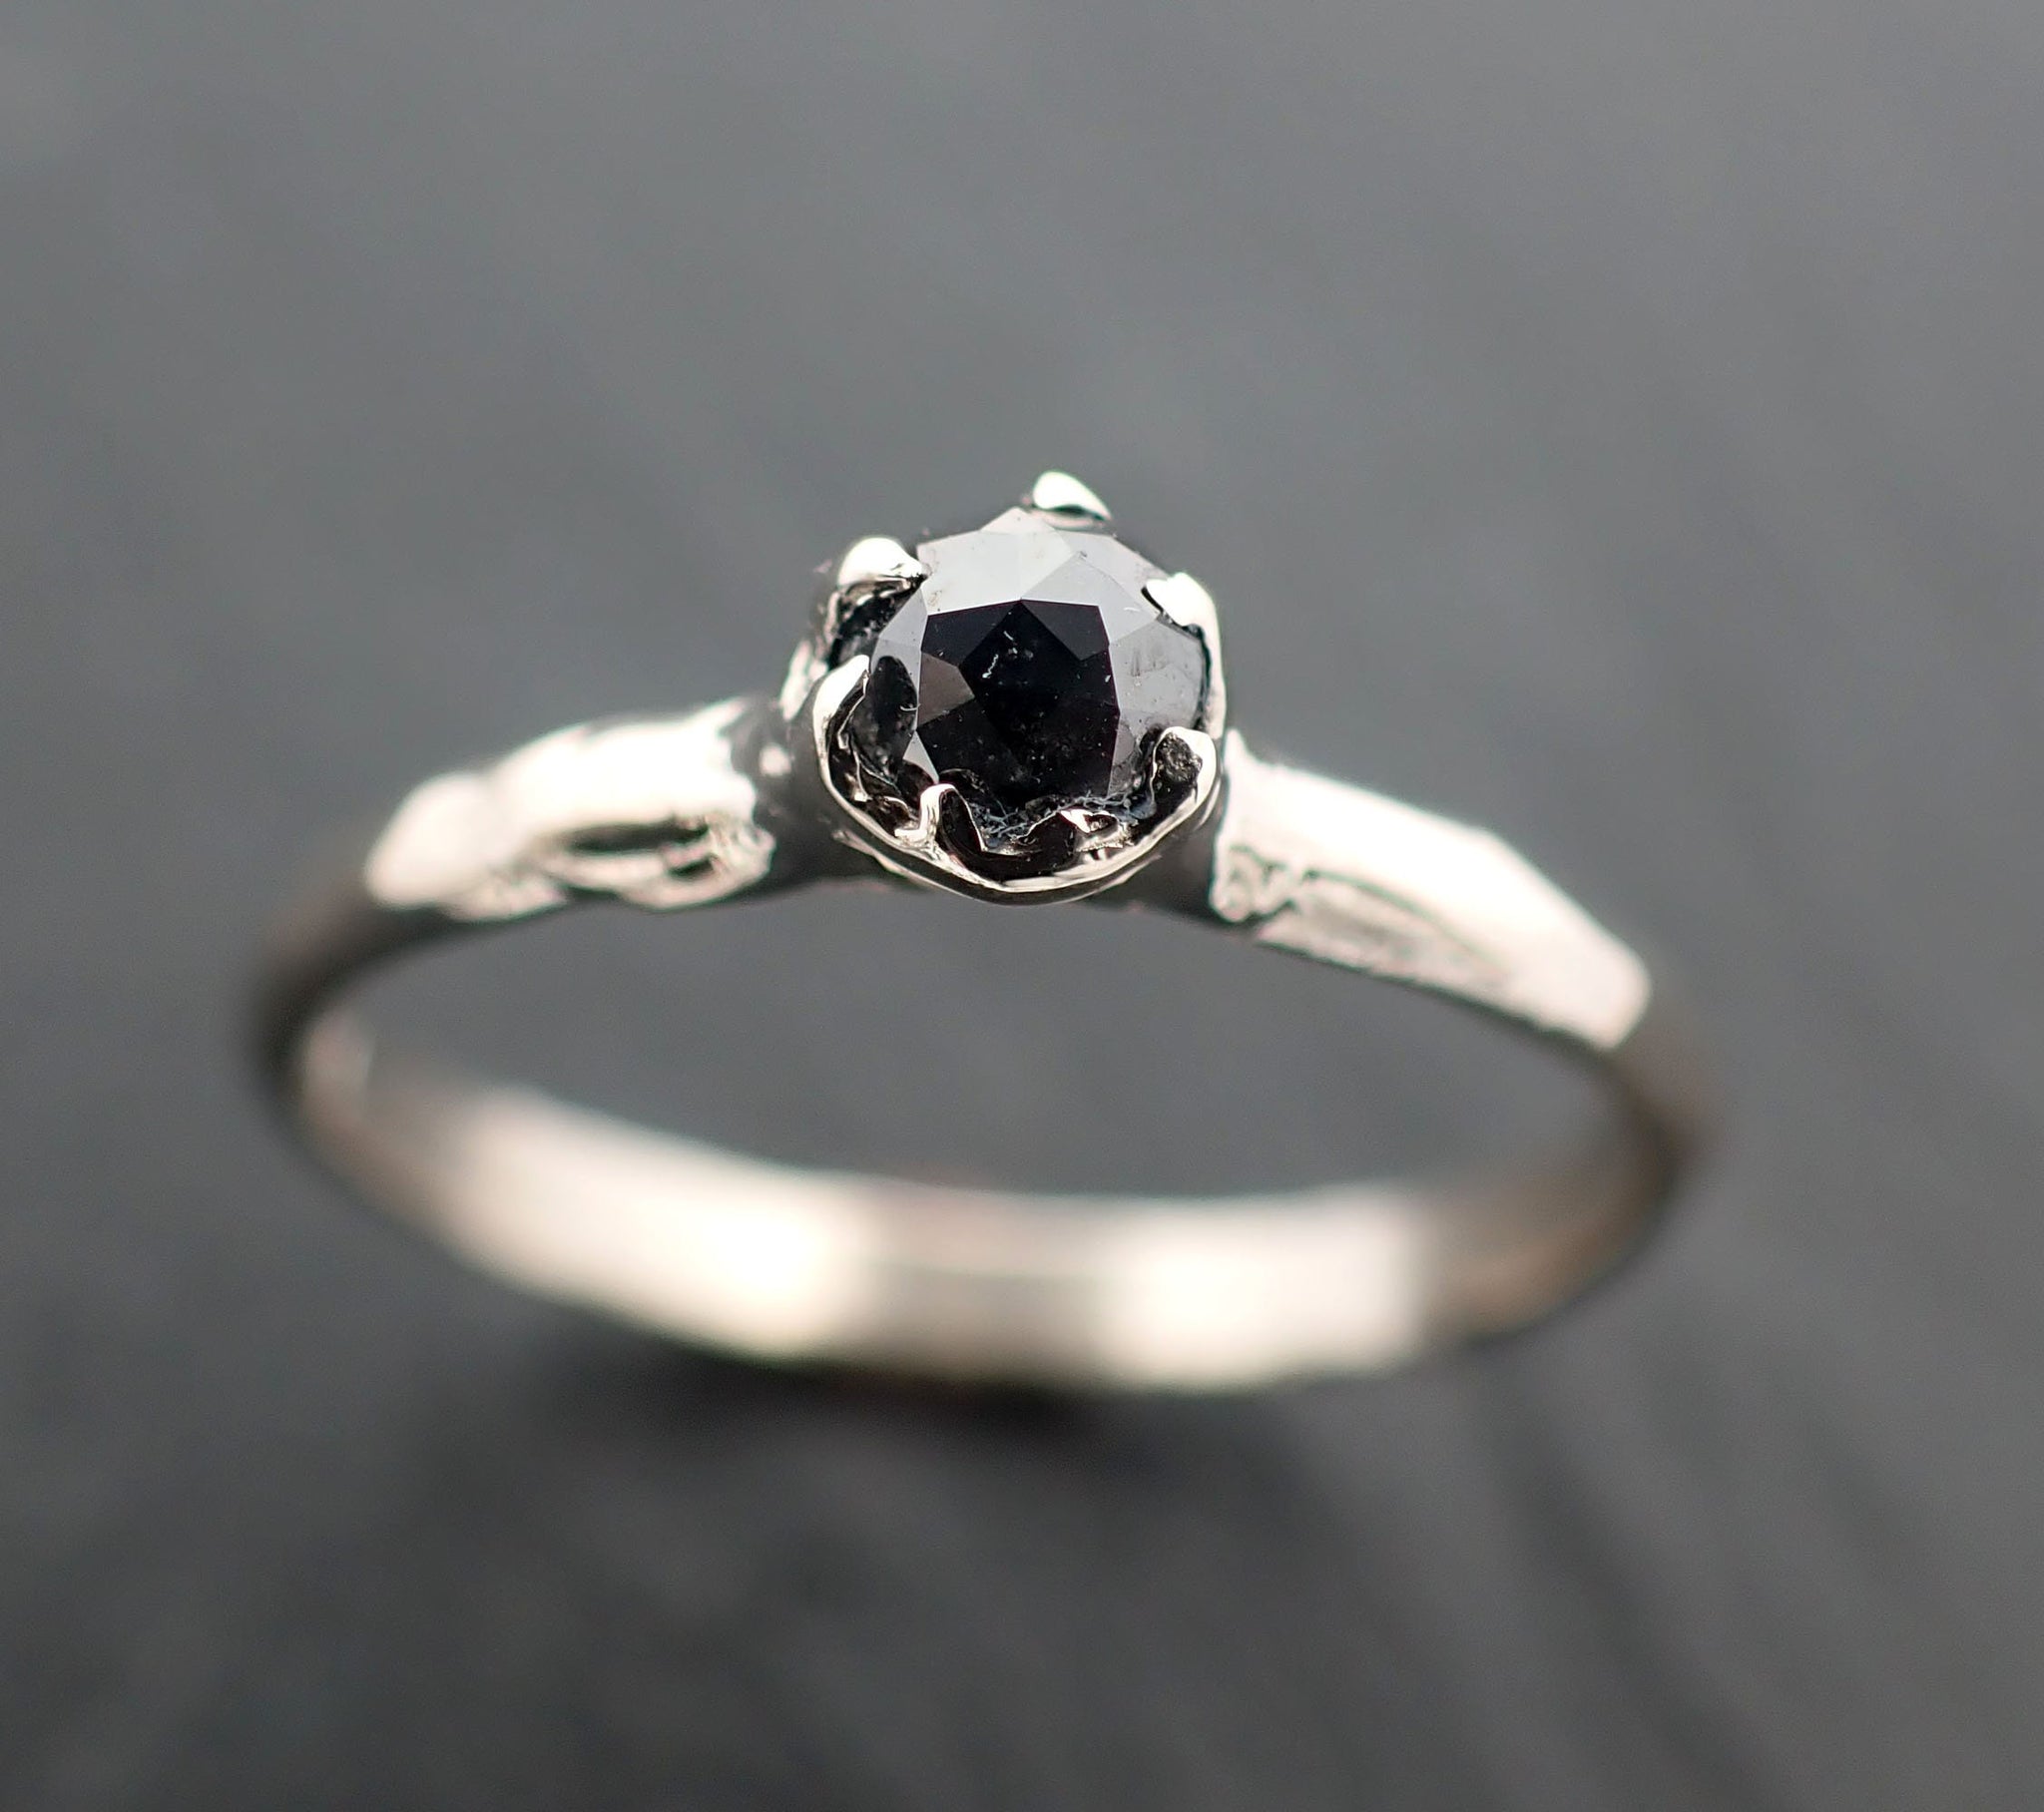 Faceted Fancy cut salt and pepper Diamond Solitaire Engagement 14k White Gold Wedding Ring byAngeline 3514